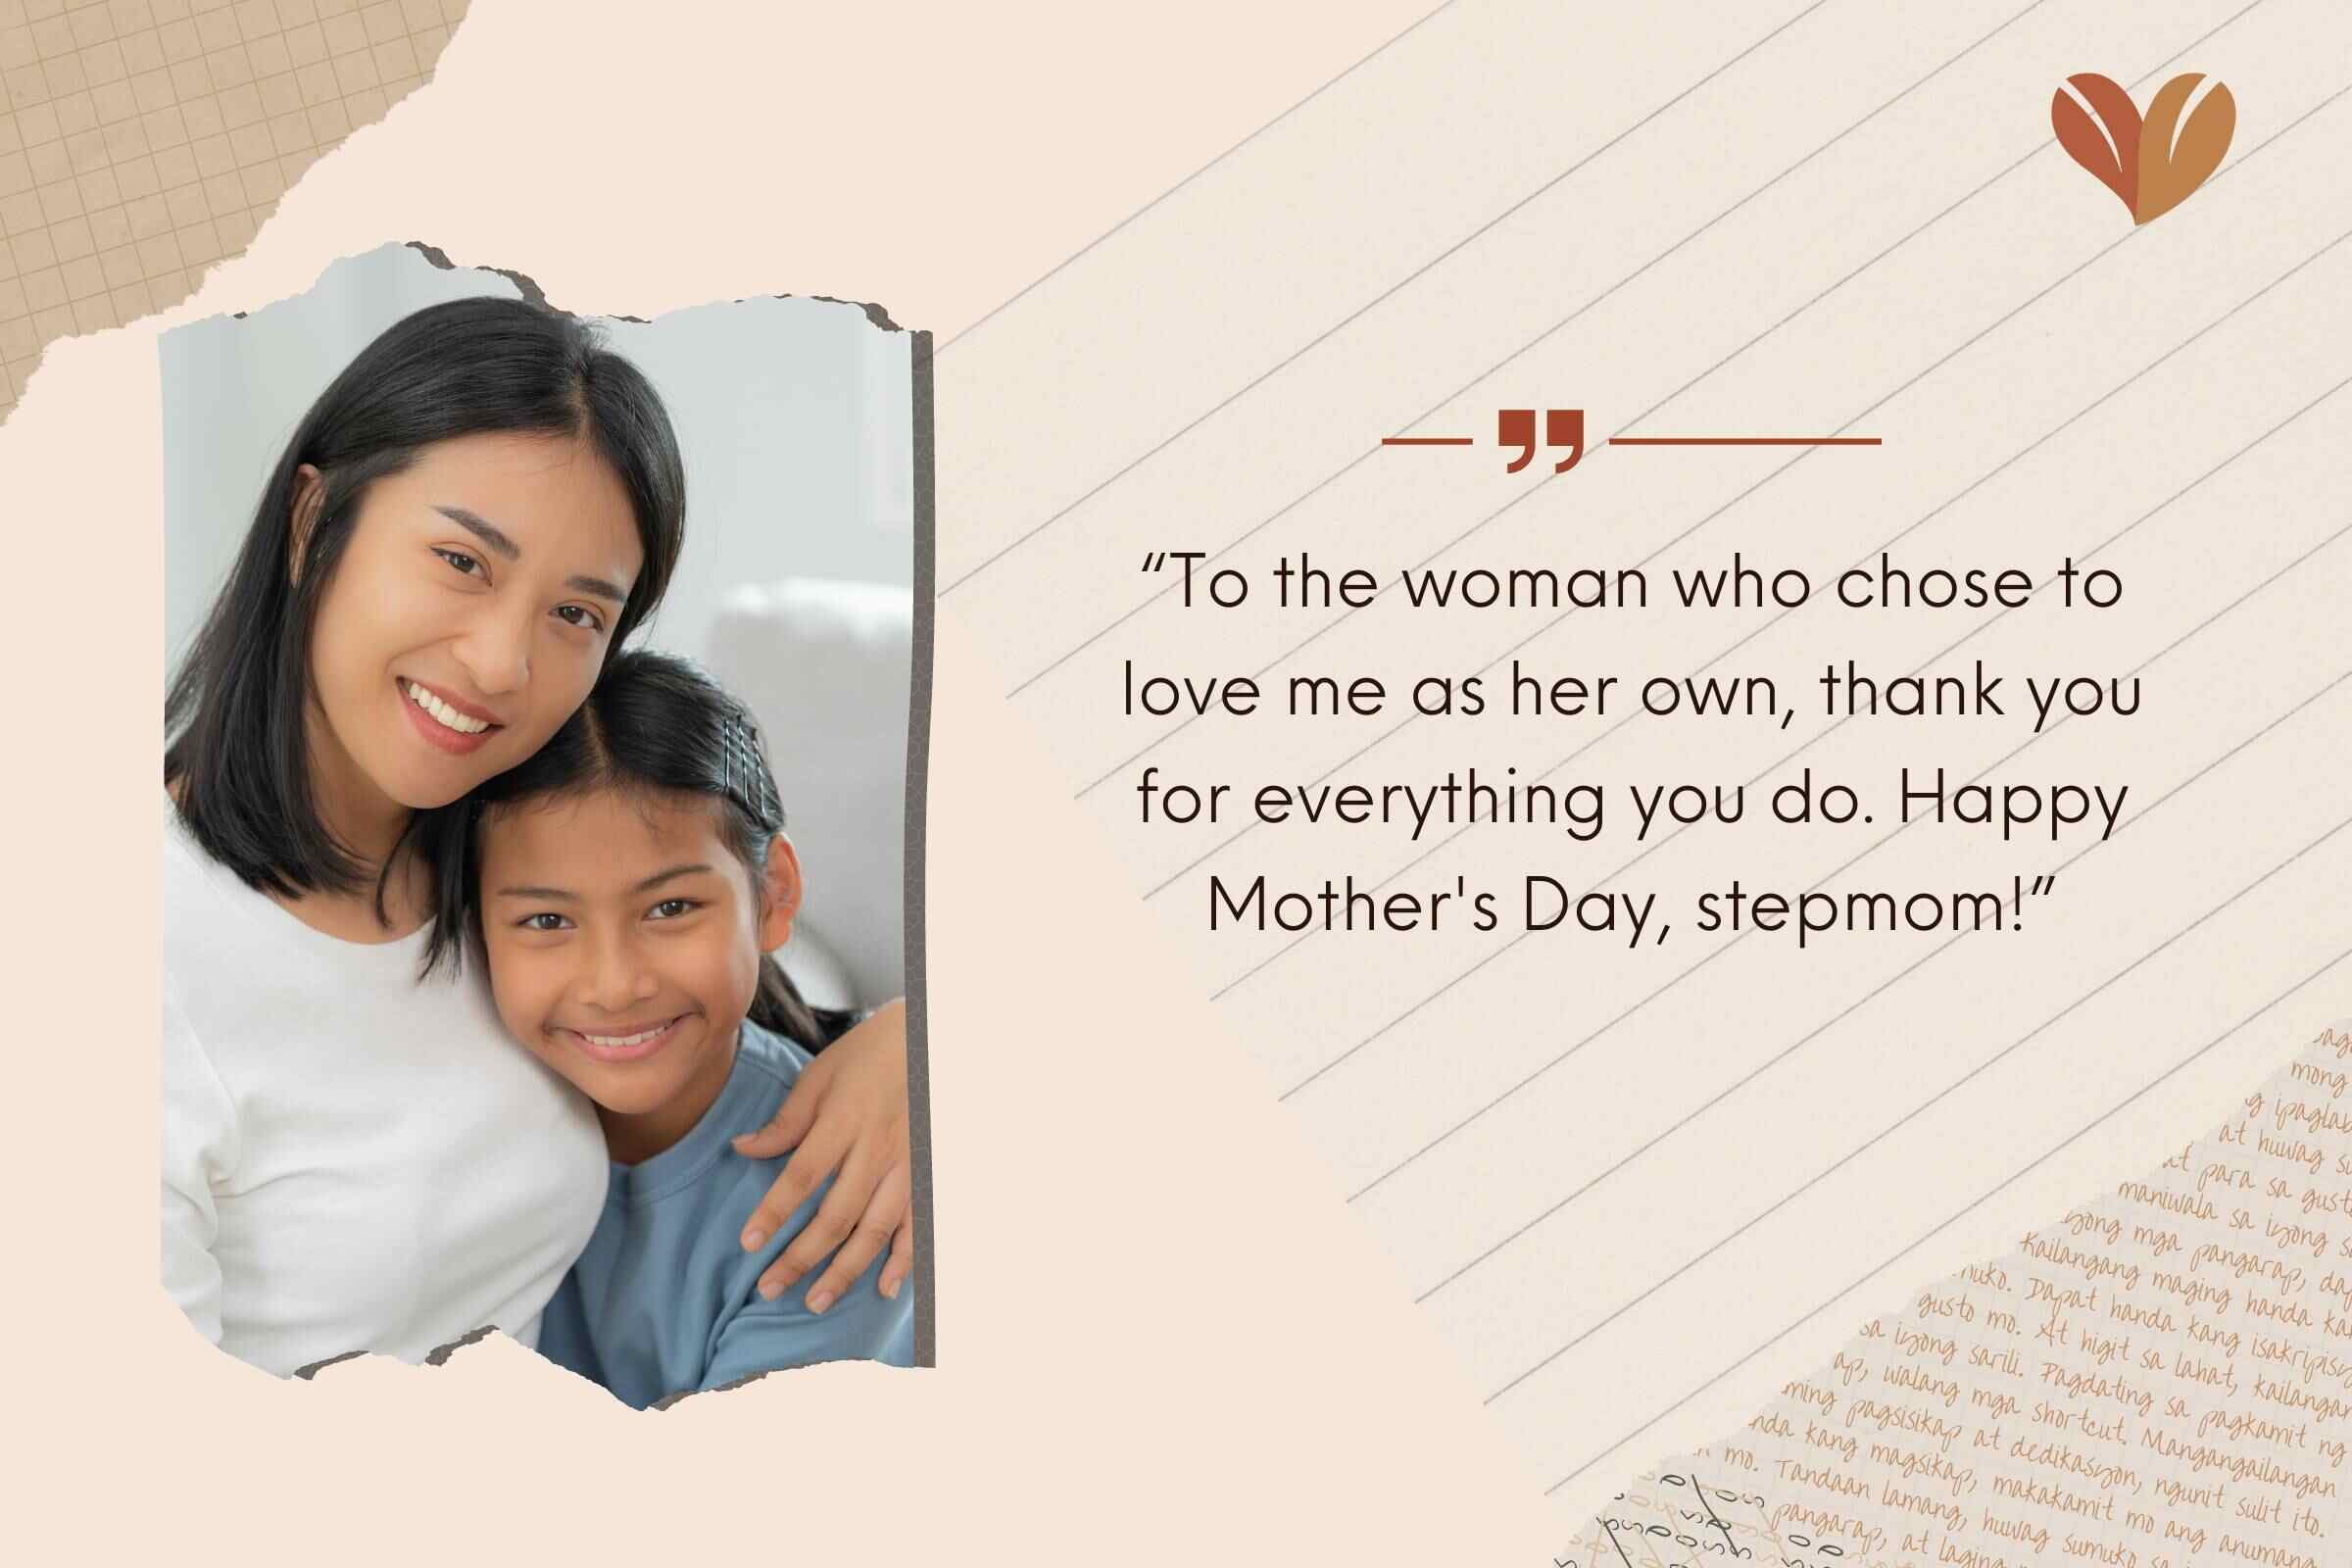 Thank You for Everything with Happy Mother's Day Stepmom